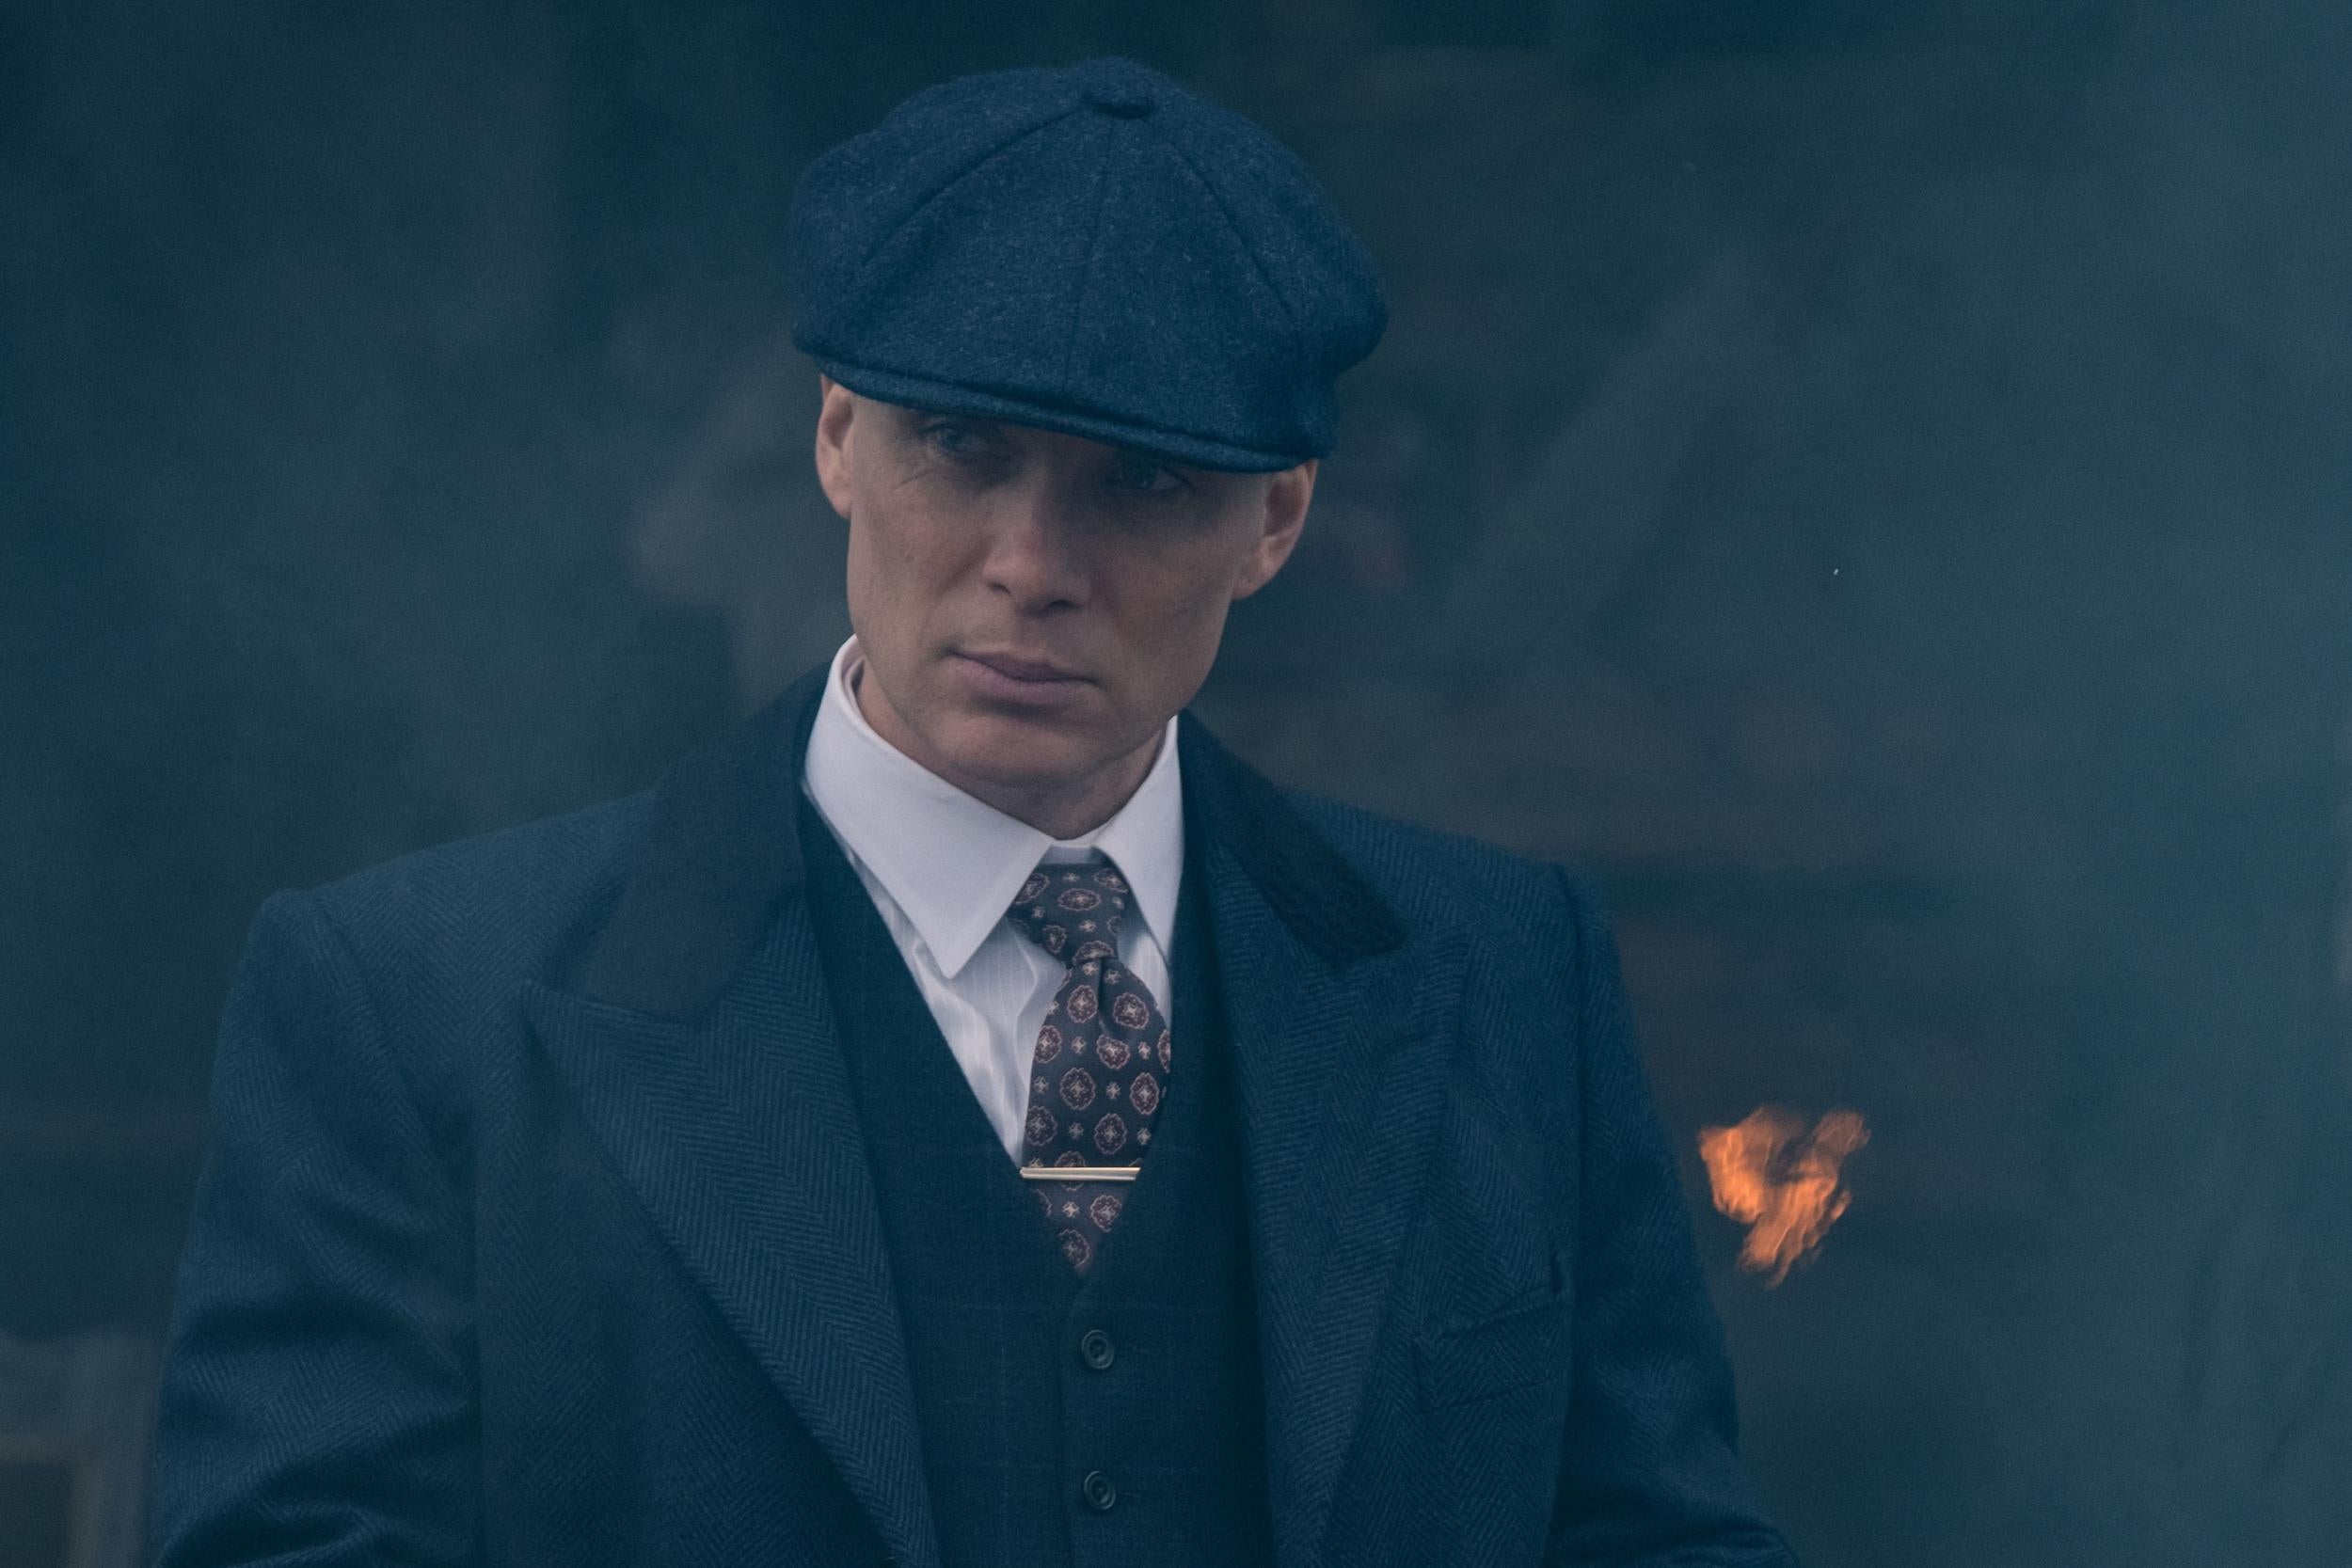 Peak viewing: Cillian Murphy as Tommy Shelby (BBC)